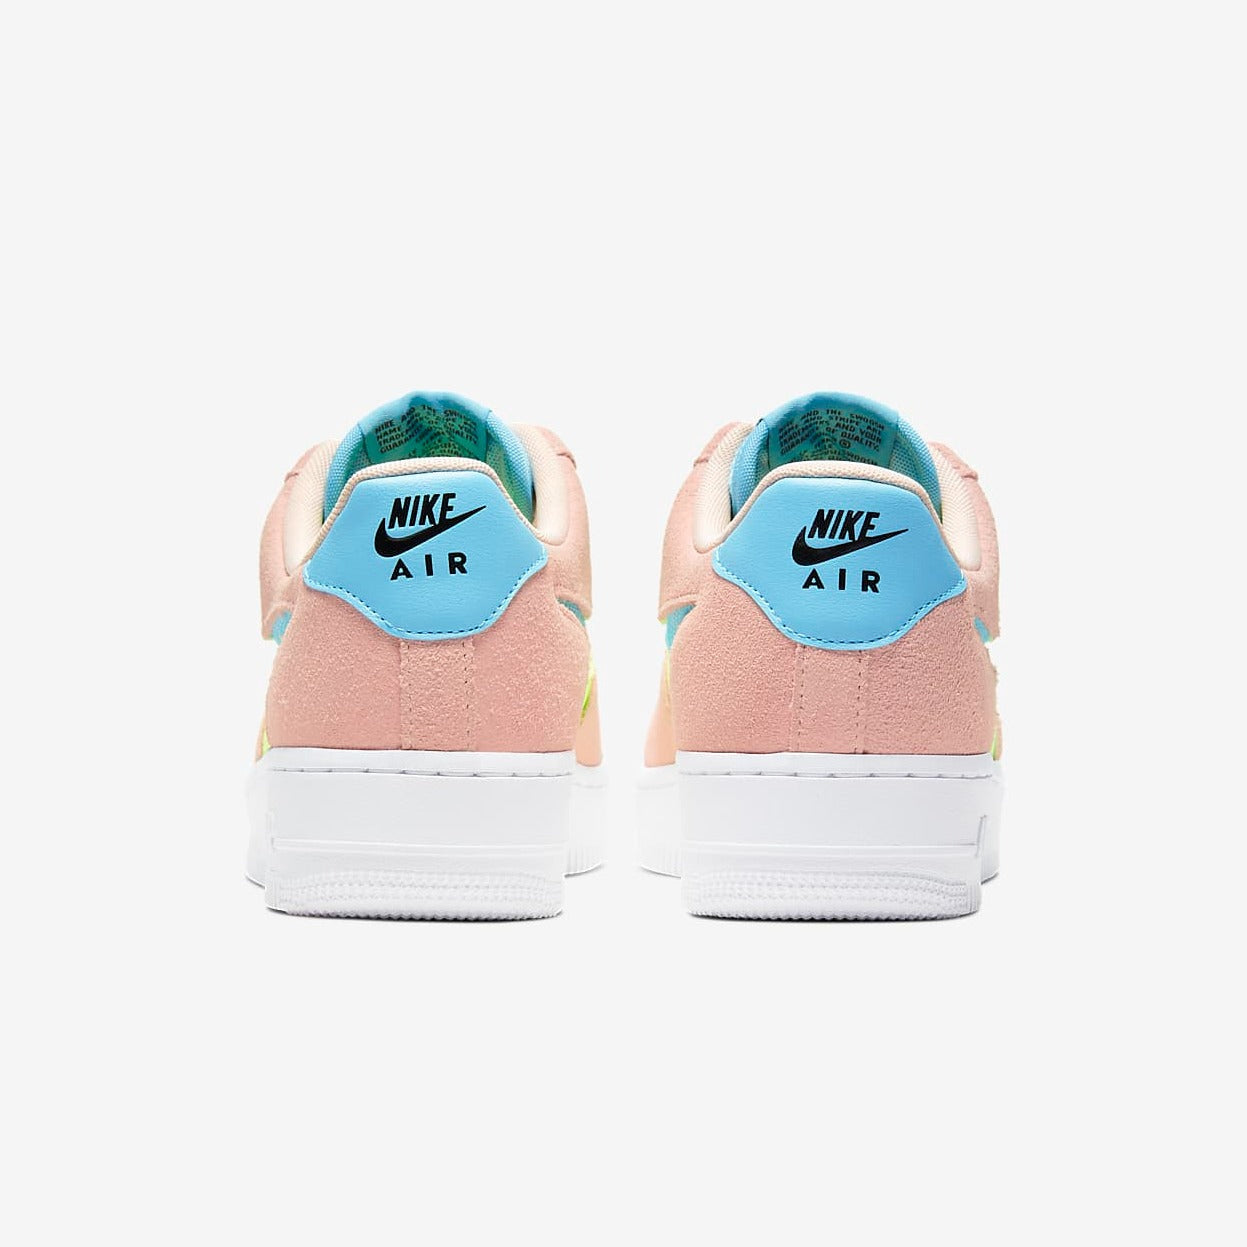 Nike Air Force 1 LV8 GS Oracle Aqua/Ghost Green-Washed Coral - CJ4093-300